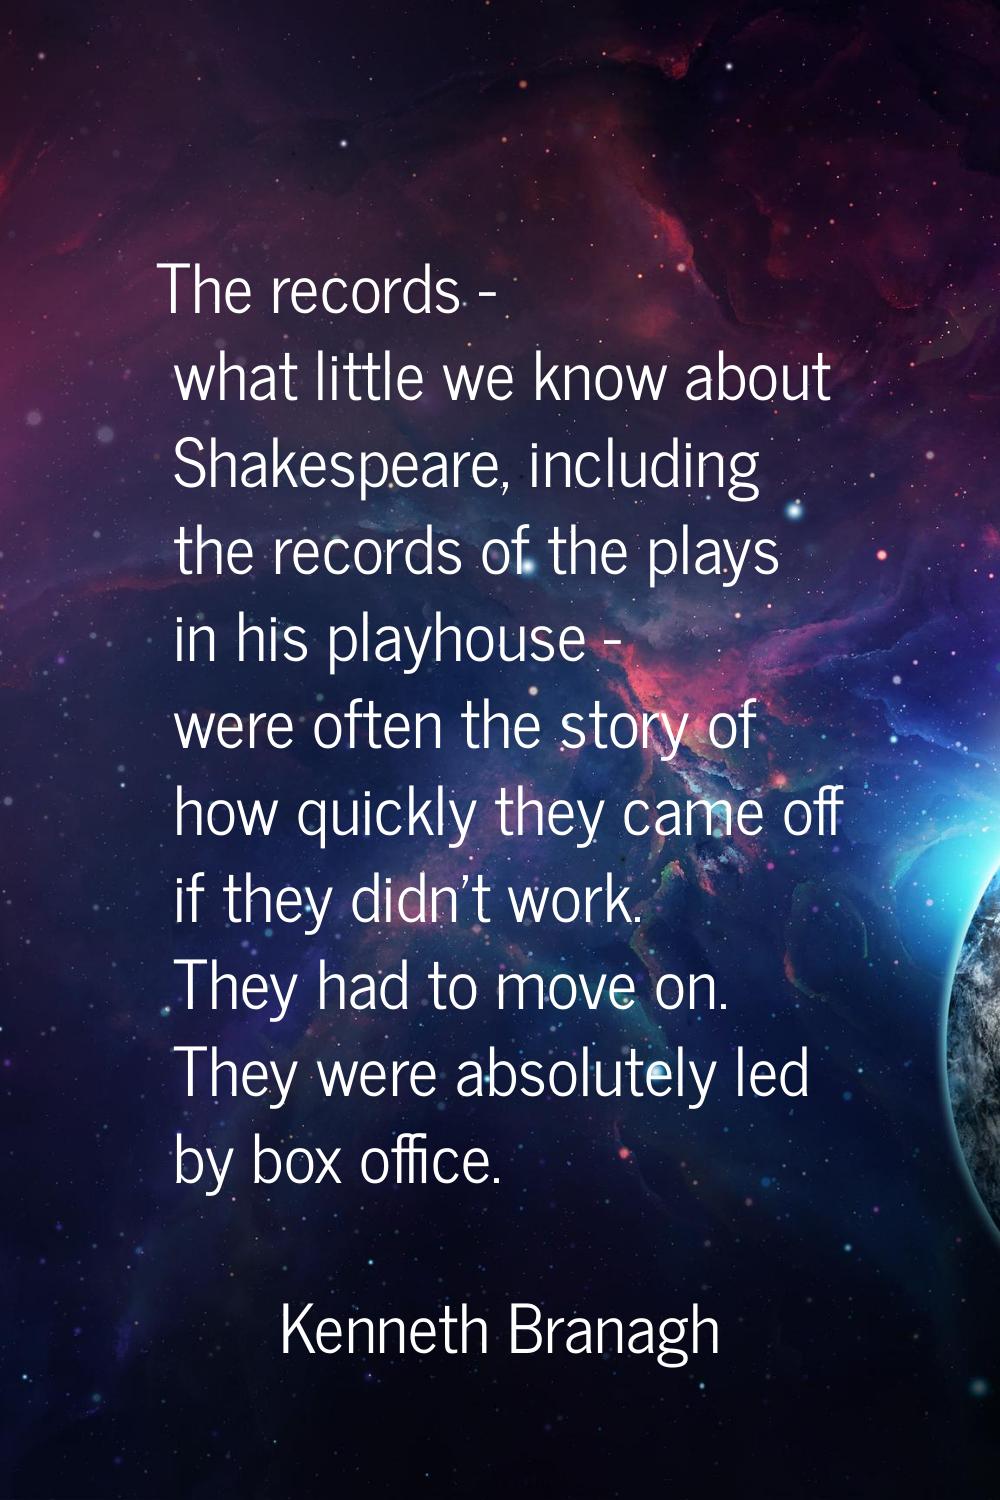 The records - what little we know about Shakespeare, including the records of the plays in his play